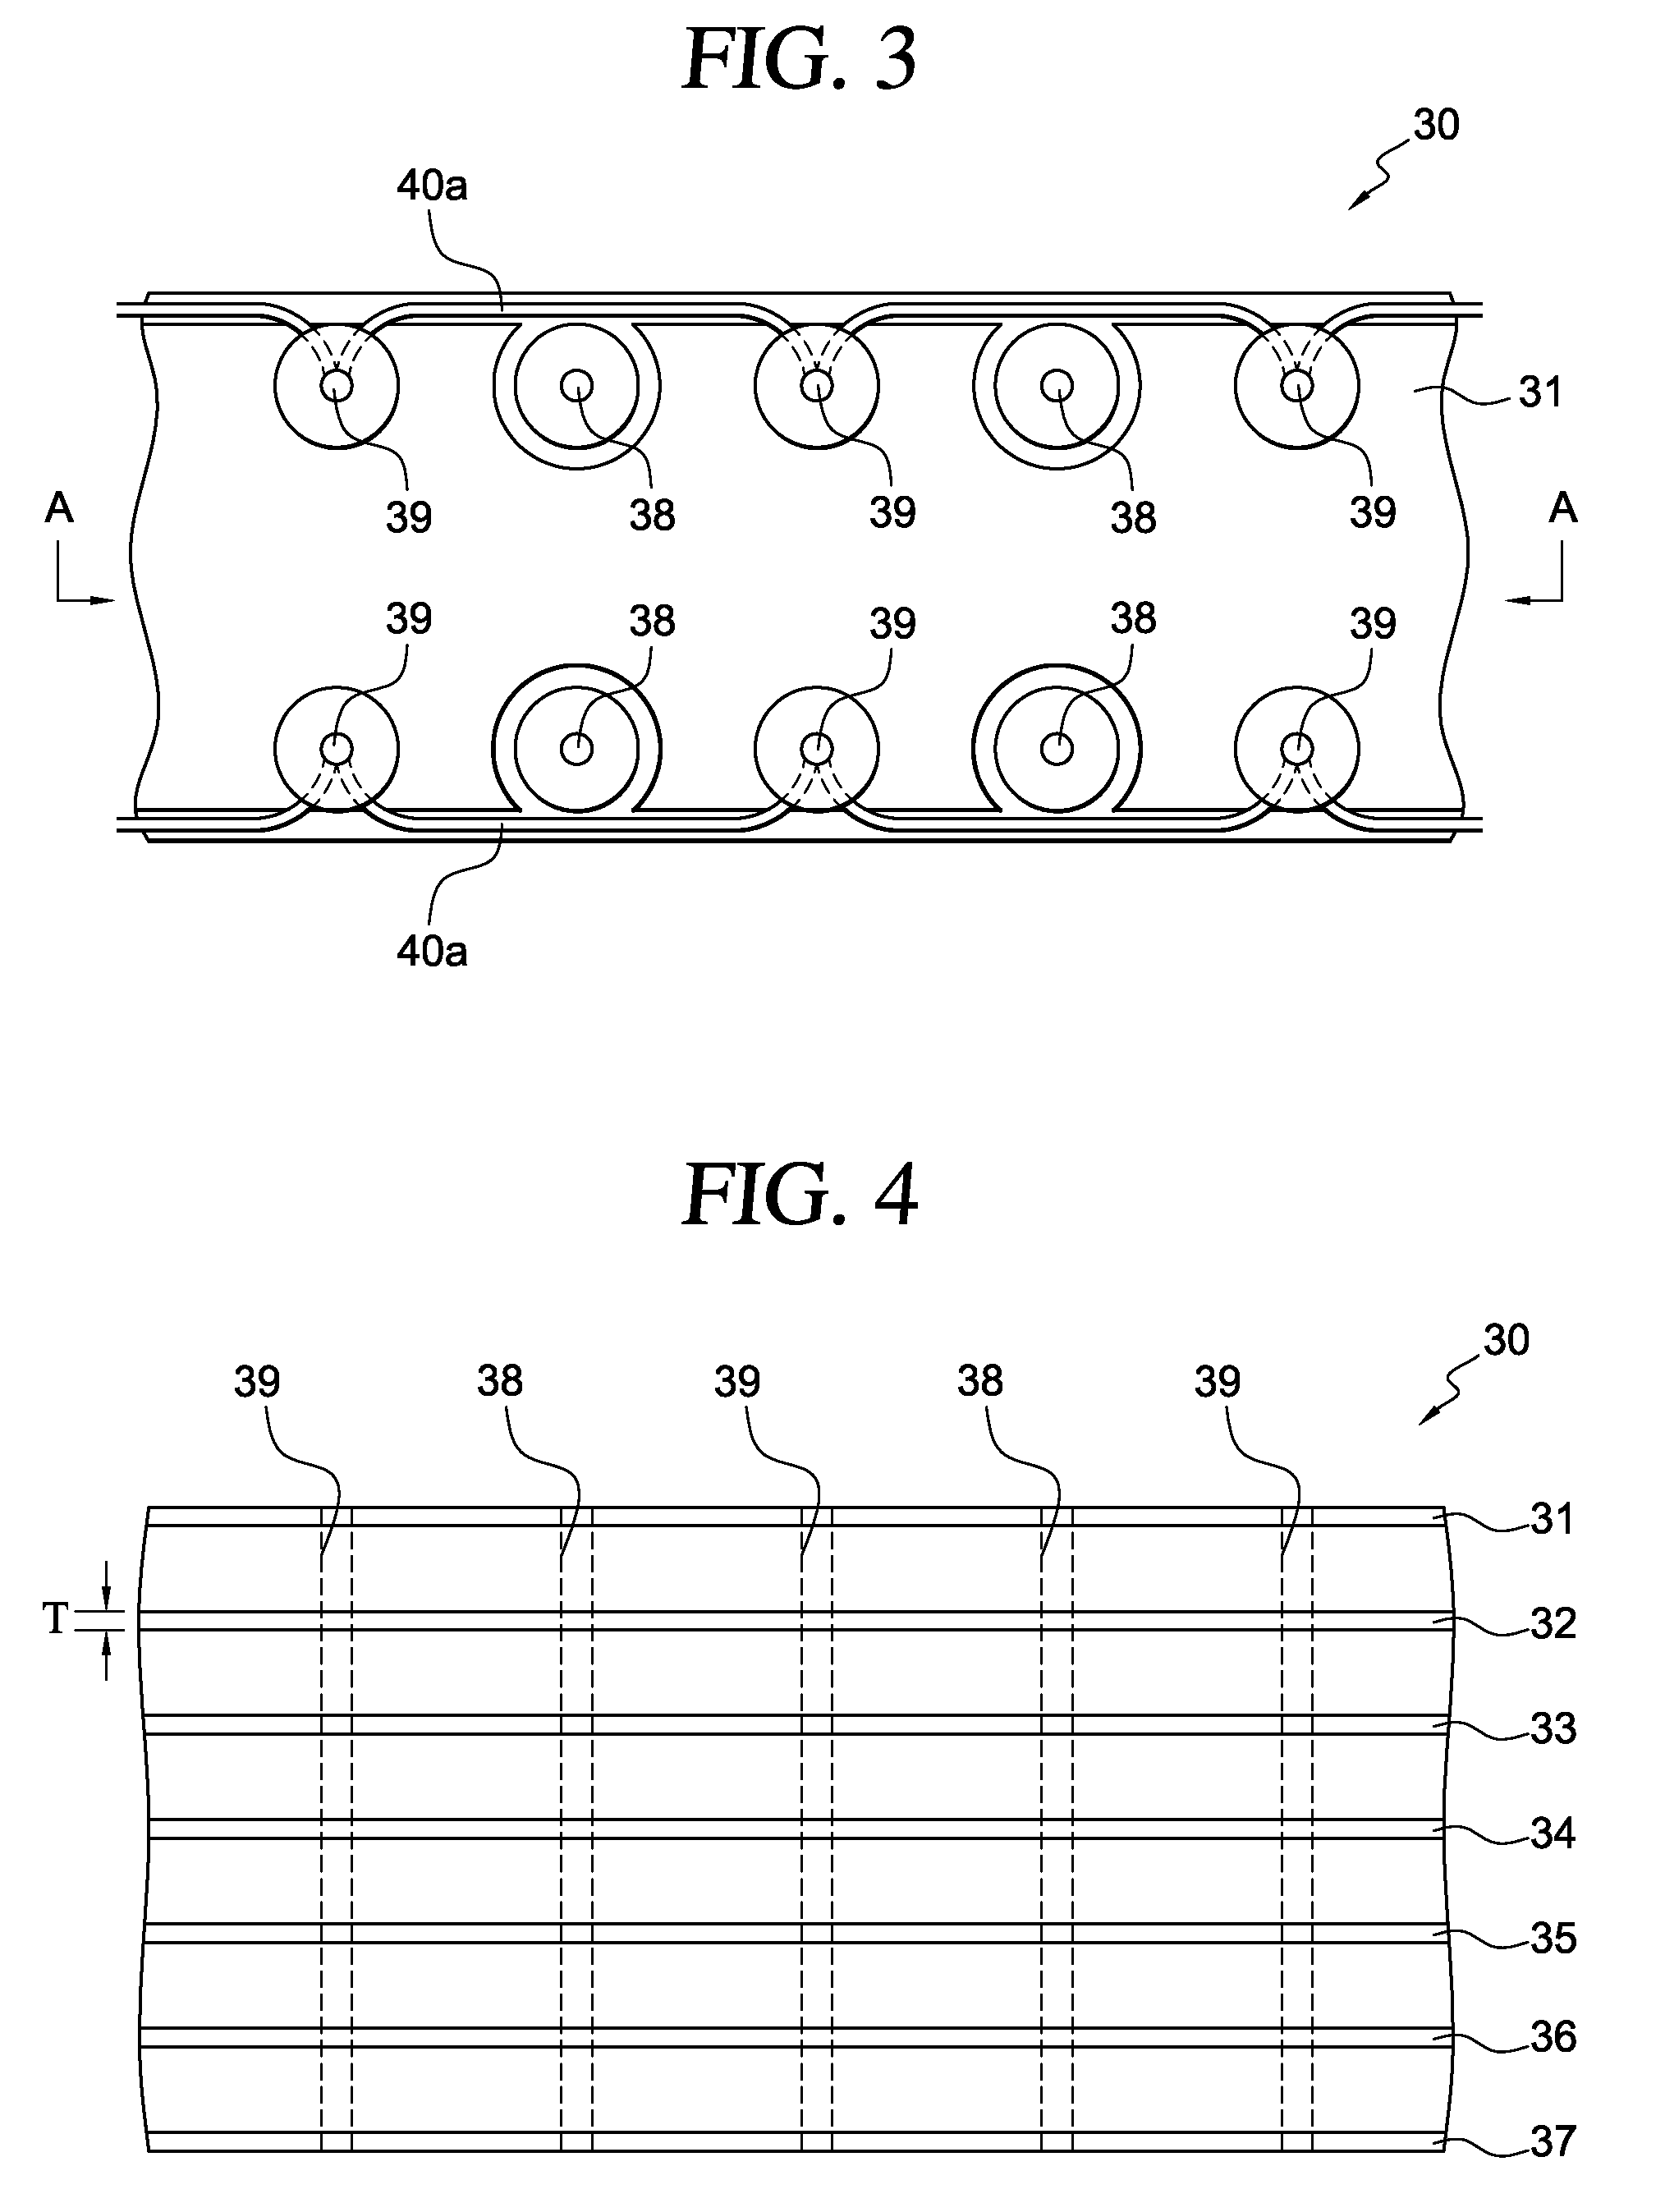 Flexible Multilayer Printed Circuit Assembly with Reduced EMI Emissions